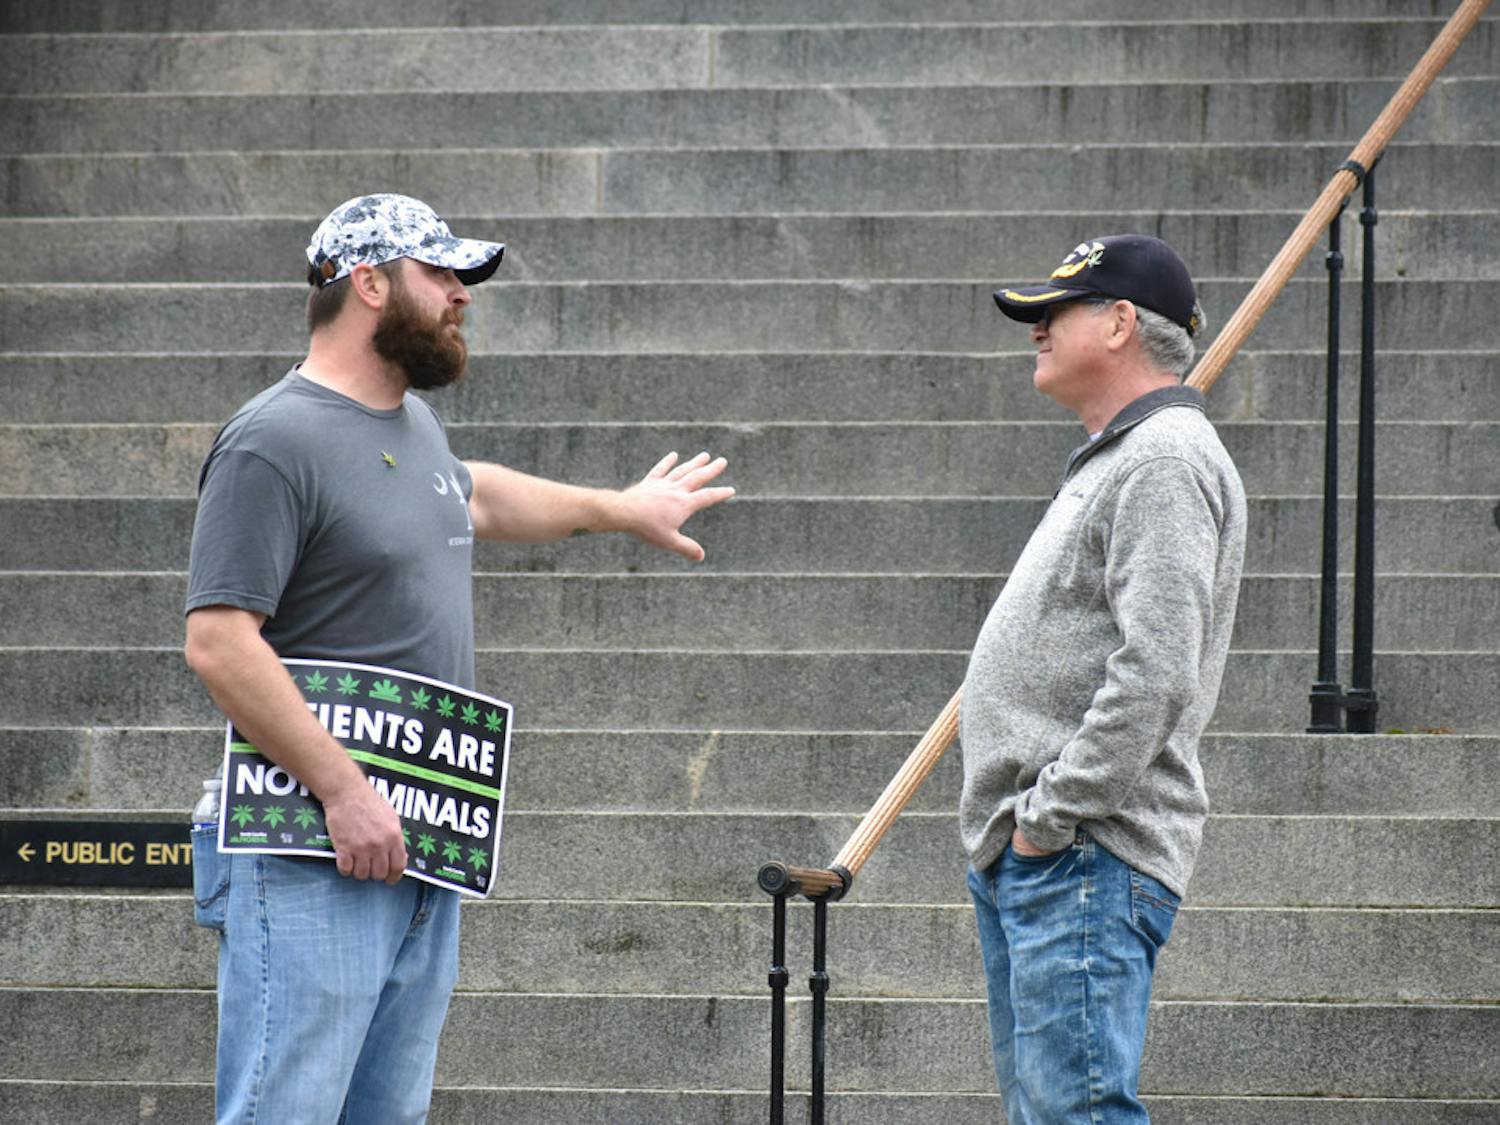 Education is one of the main pillars of South Carolina NORML. Protestors spoke with those passing by about healthy cannabis use.